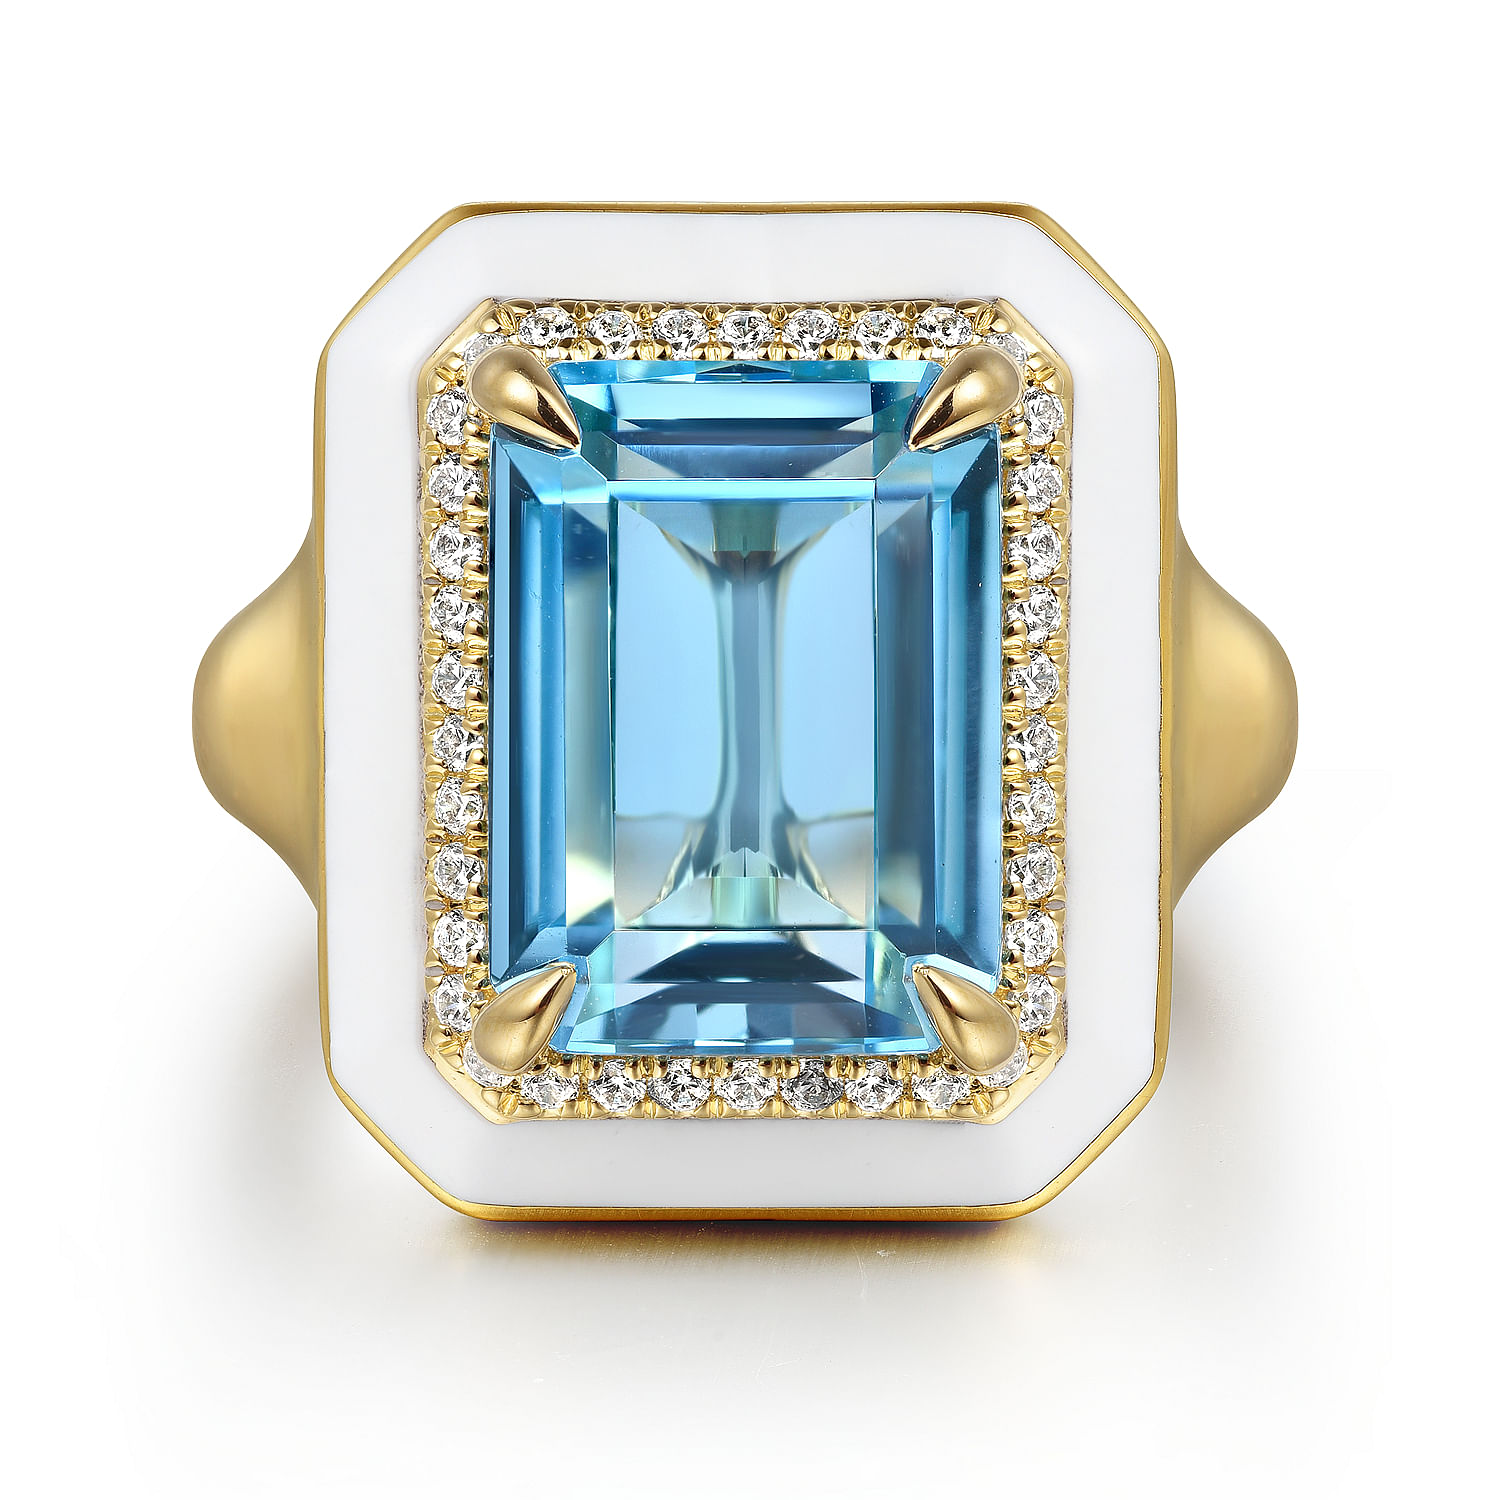 Gabriel - 14K Yellow Gold Diamond and Blue Topaz Emerald Cut Ladies Ring With Flower Pattern J-Back and White Enamel